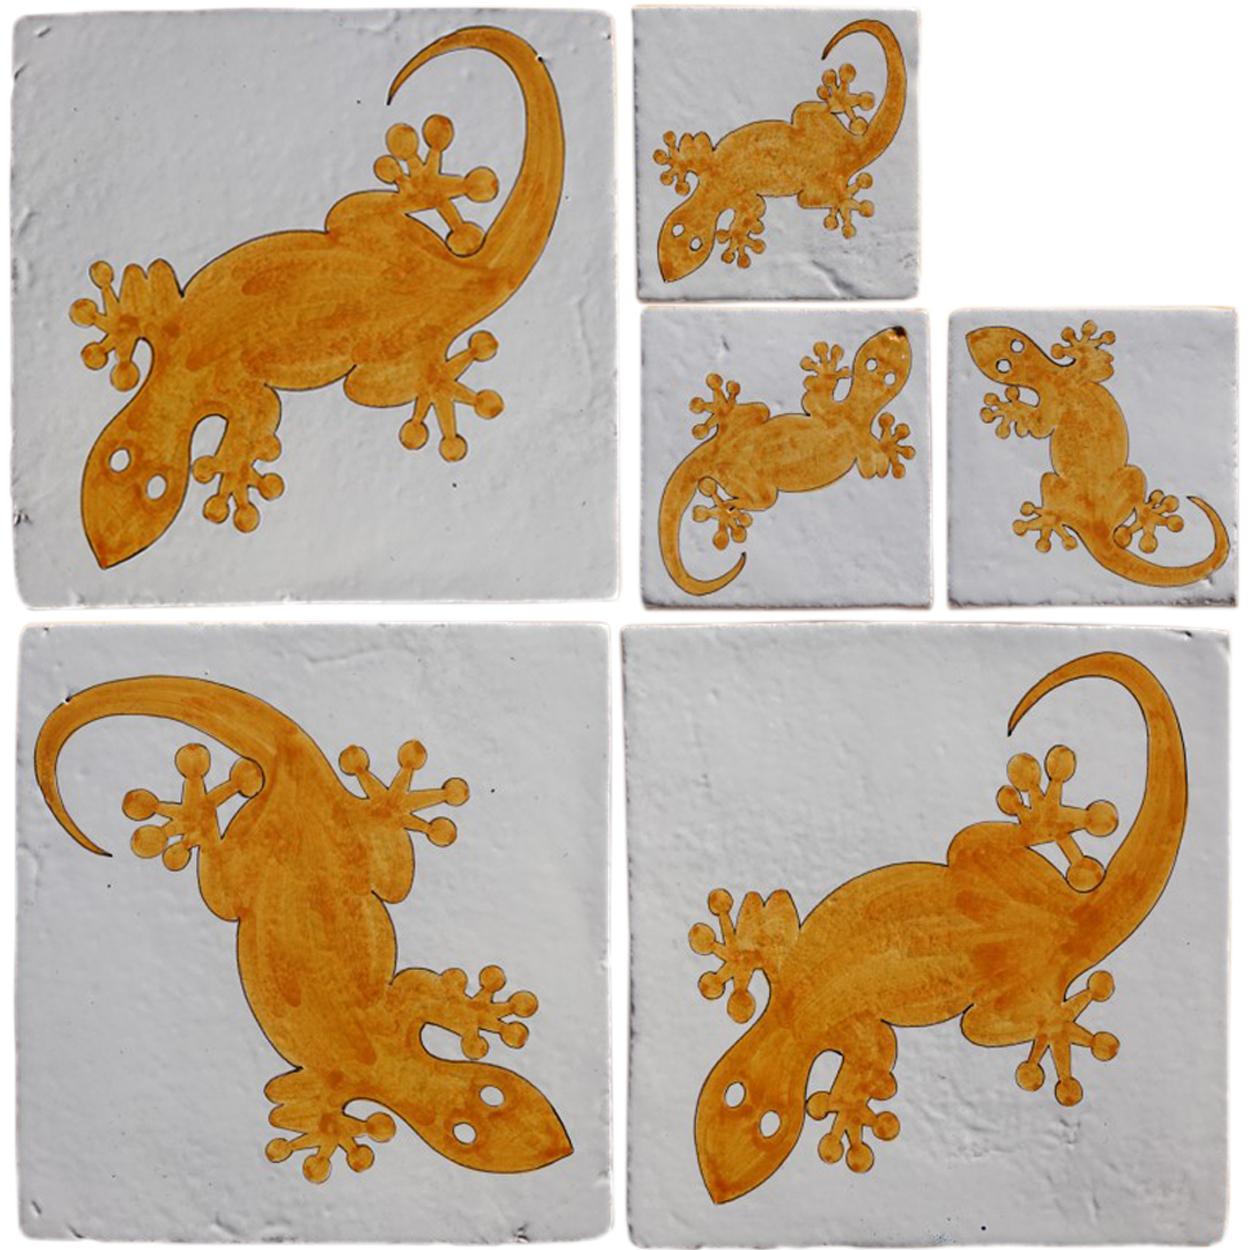 Fun and playful tile with the image of a gecko. In a gorgeous bright orange color. Avalaible in two sizes. These tiles could be combined with eachother or incorporated into a custom tile design.
Tarentola mauritanica, known as the common wall